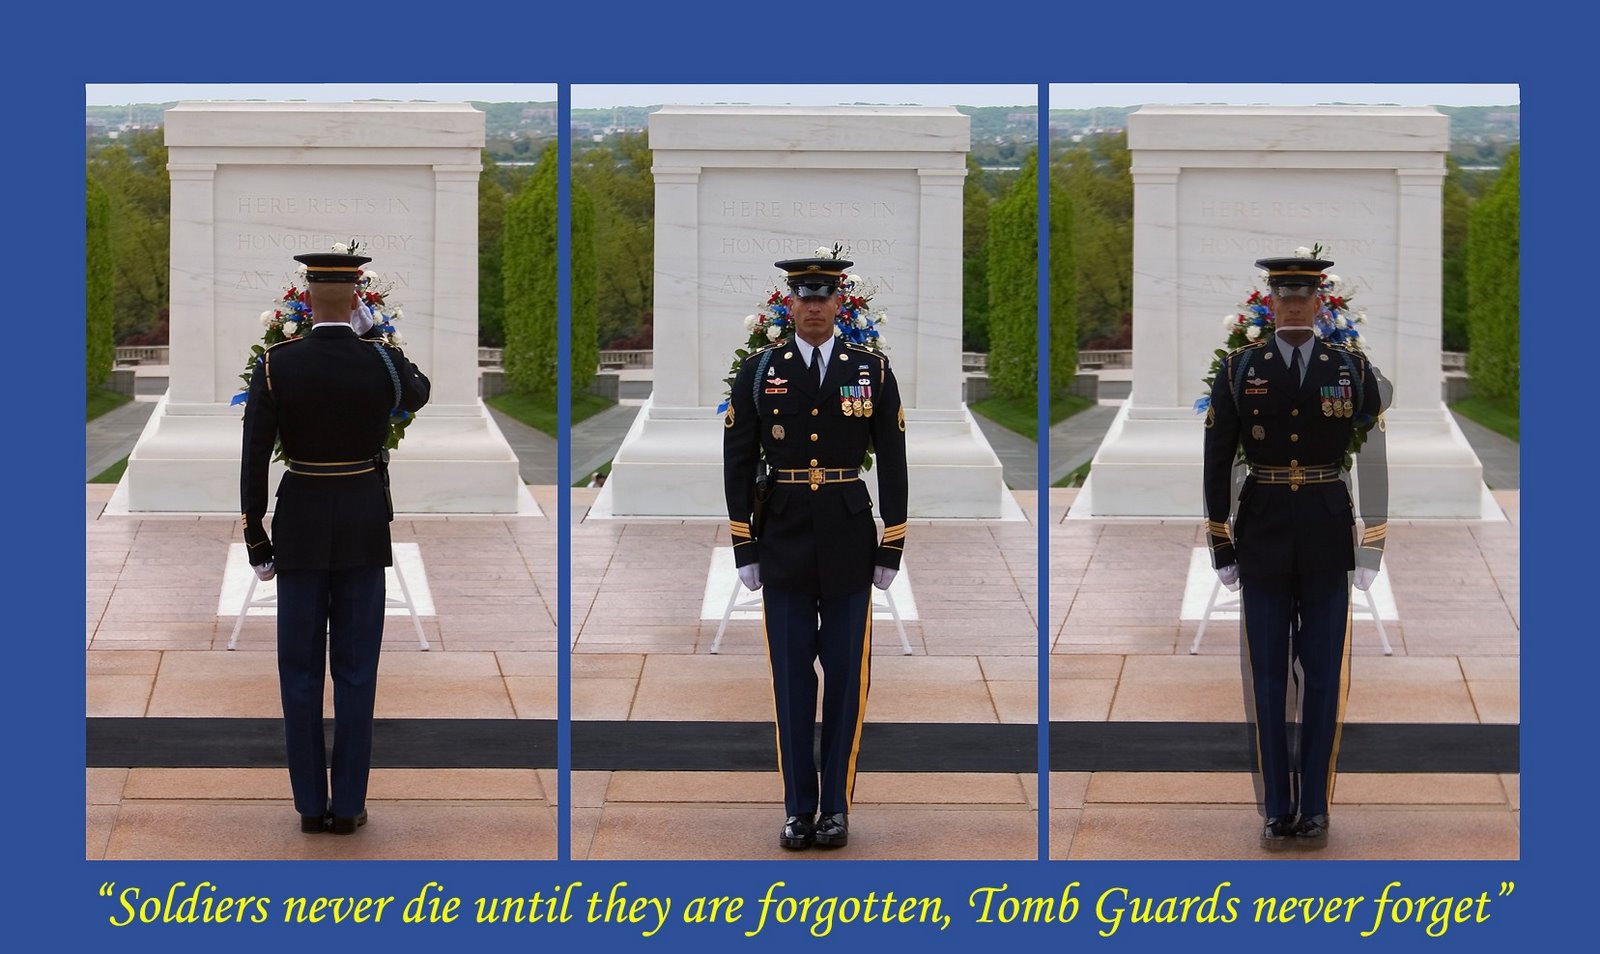 [tomb-guards-never-forget-photo-gerry-clarke-april-2005.jpg]